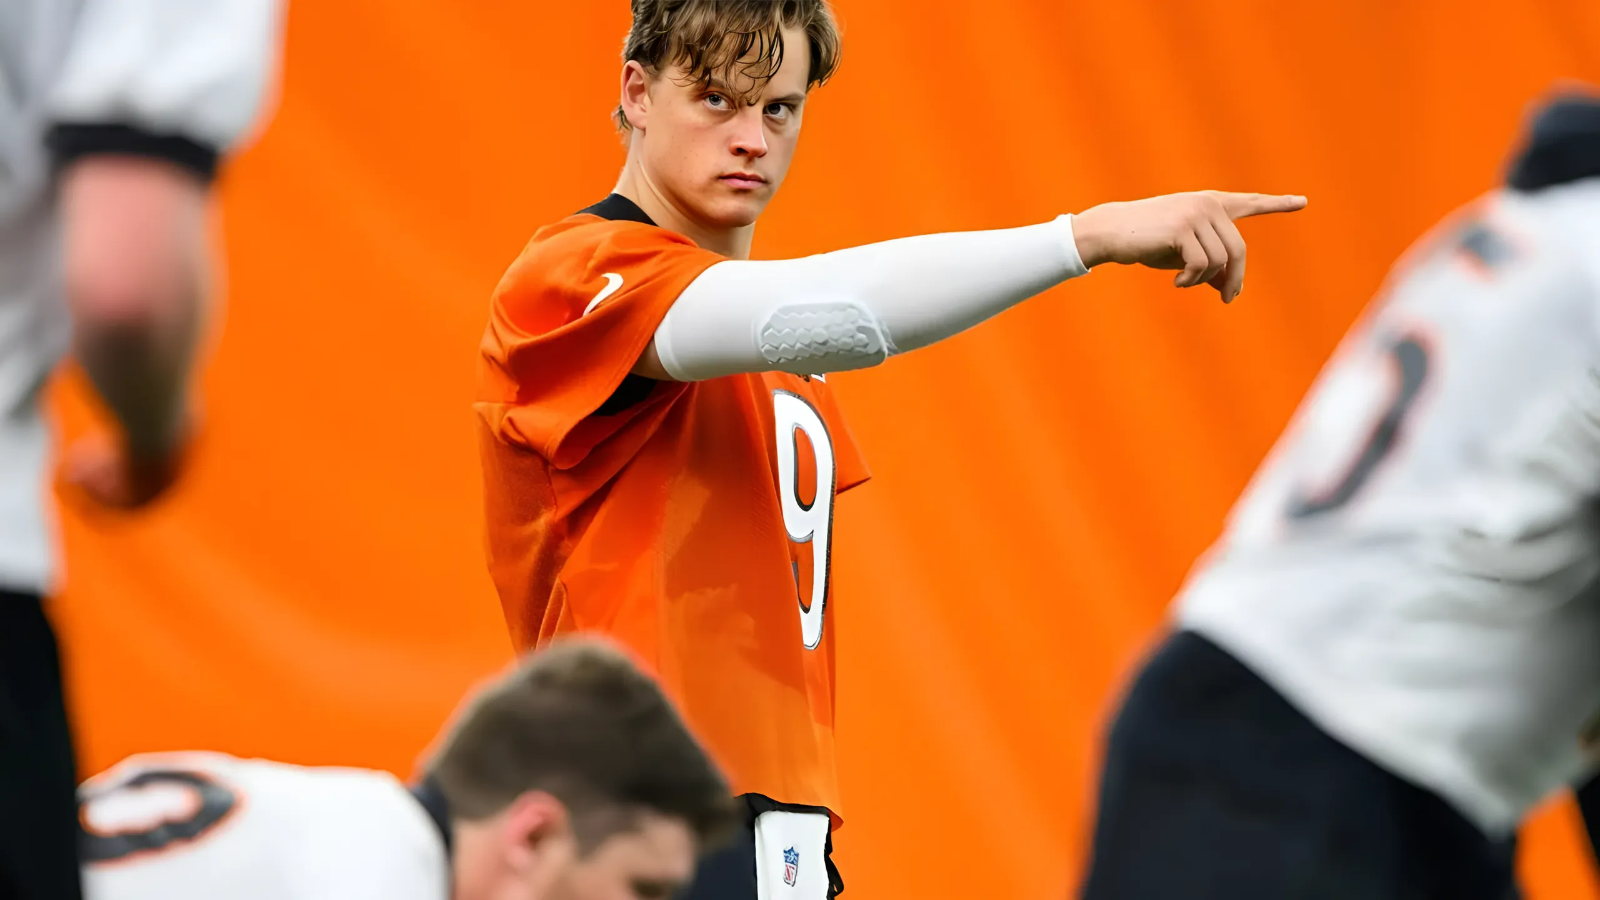 Joe Burrow Packs On The Wisdom For Fifth NFL Season:  'He’s Always Working On Something. That’s What Makes Him Different.'